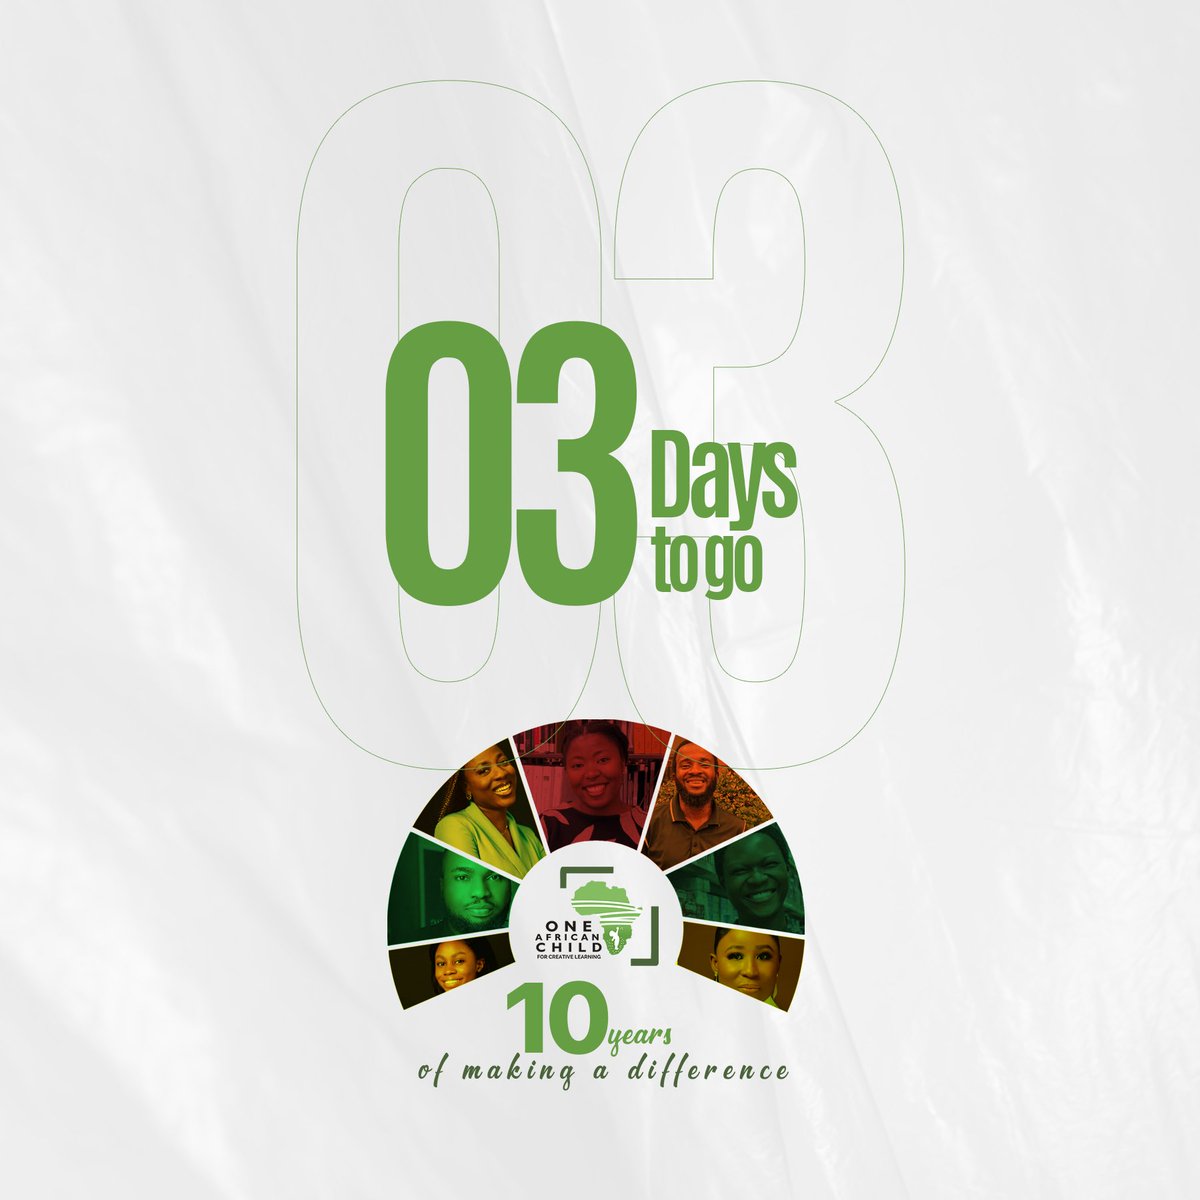 Time flies when you're making a difference. We're thrilled to be counting down 3 days until our anniversary celebration! 

#OACAnniversary #10YearsofImpact #OneAfricanChild #TransformingEducation #OAC 
#ADecadeOfImpact